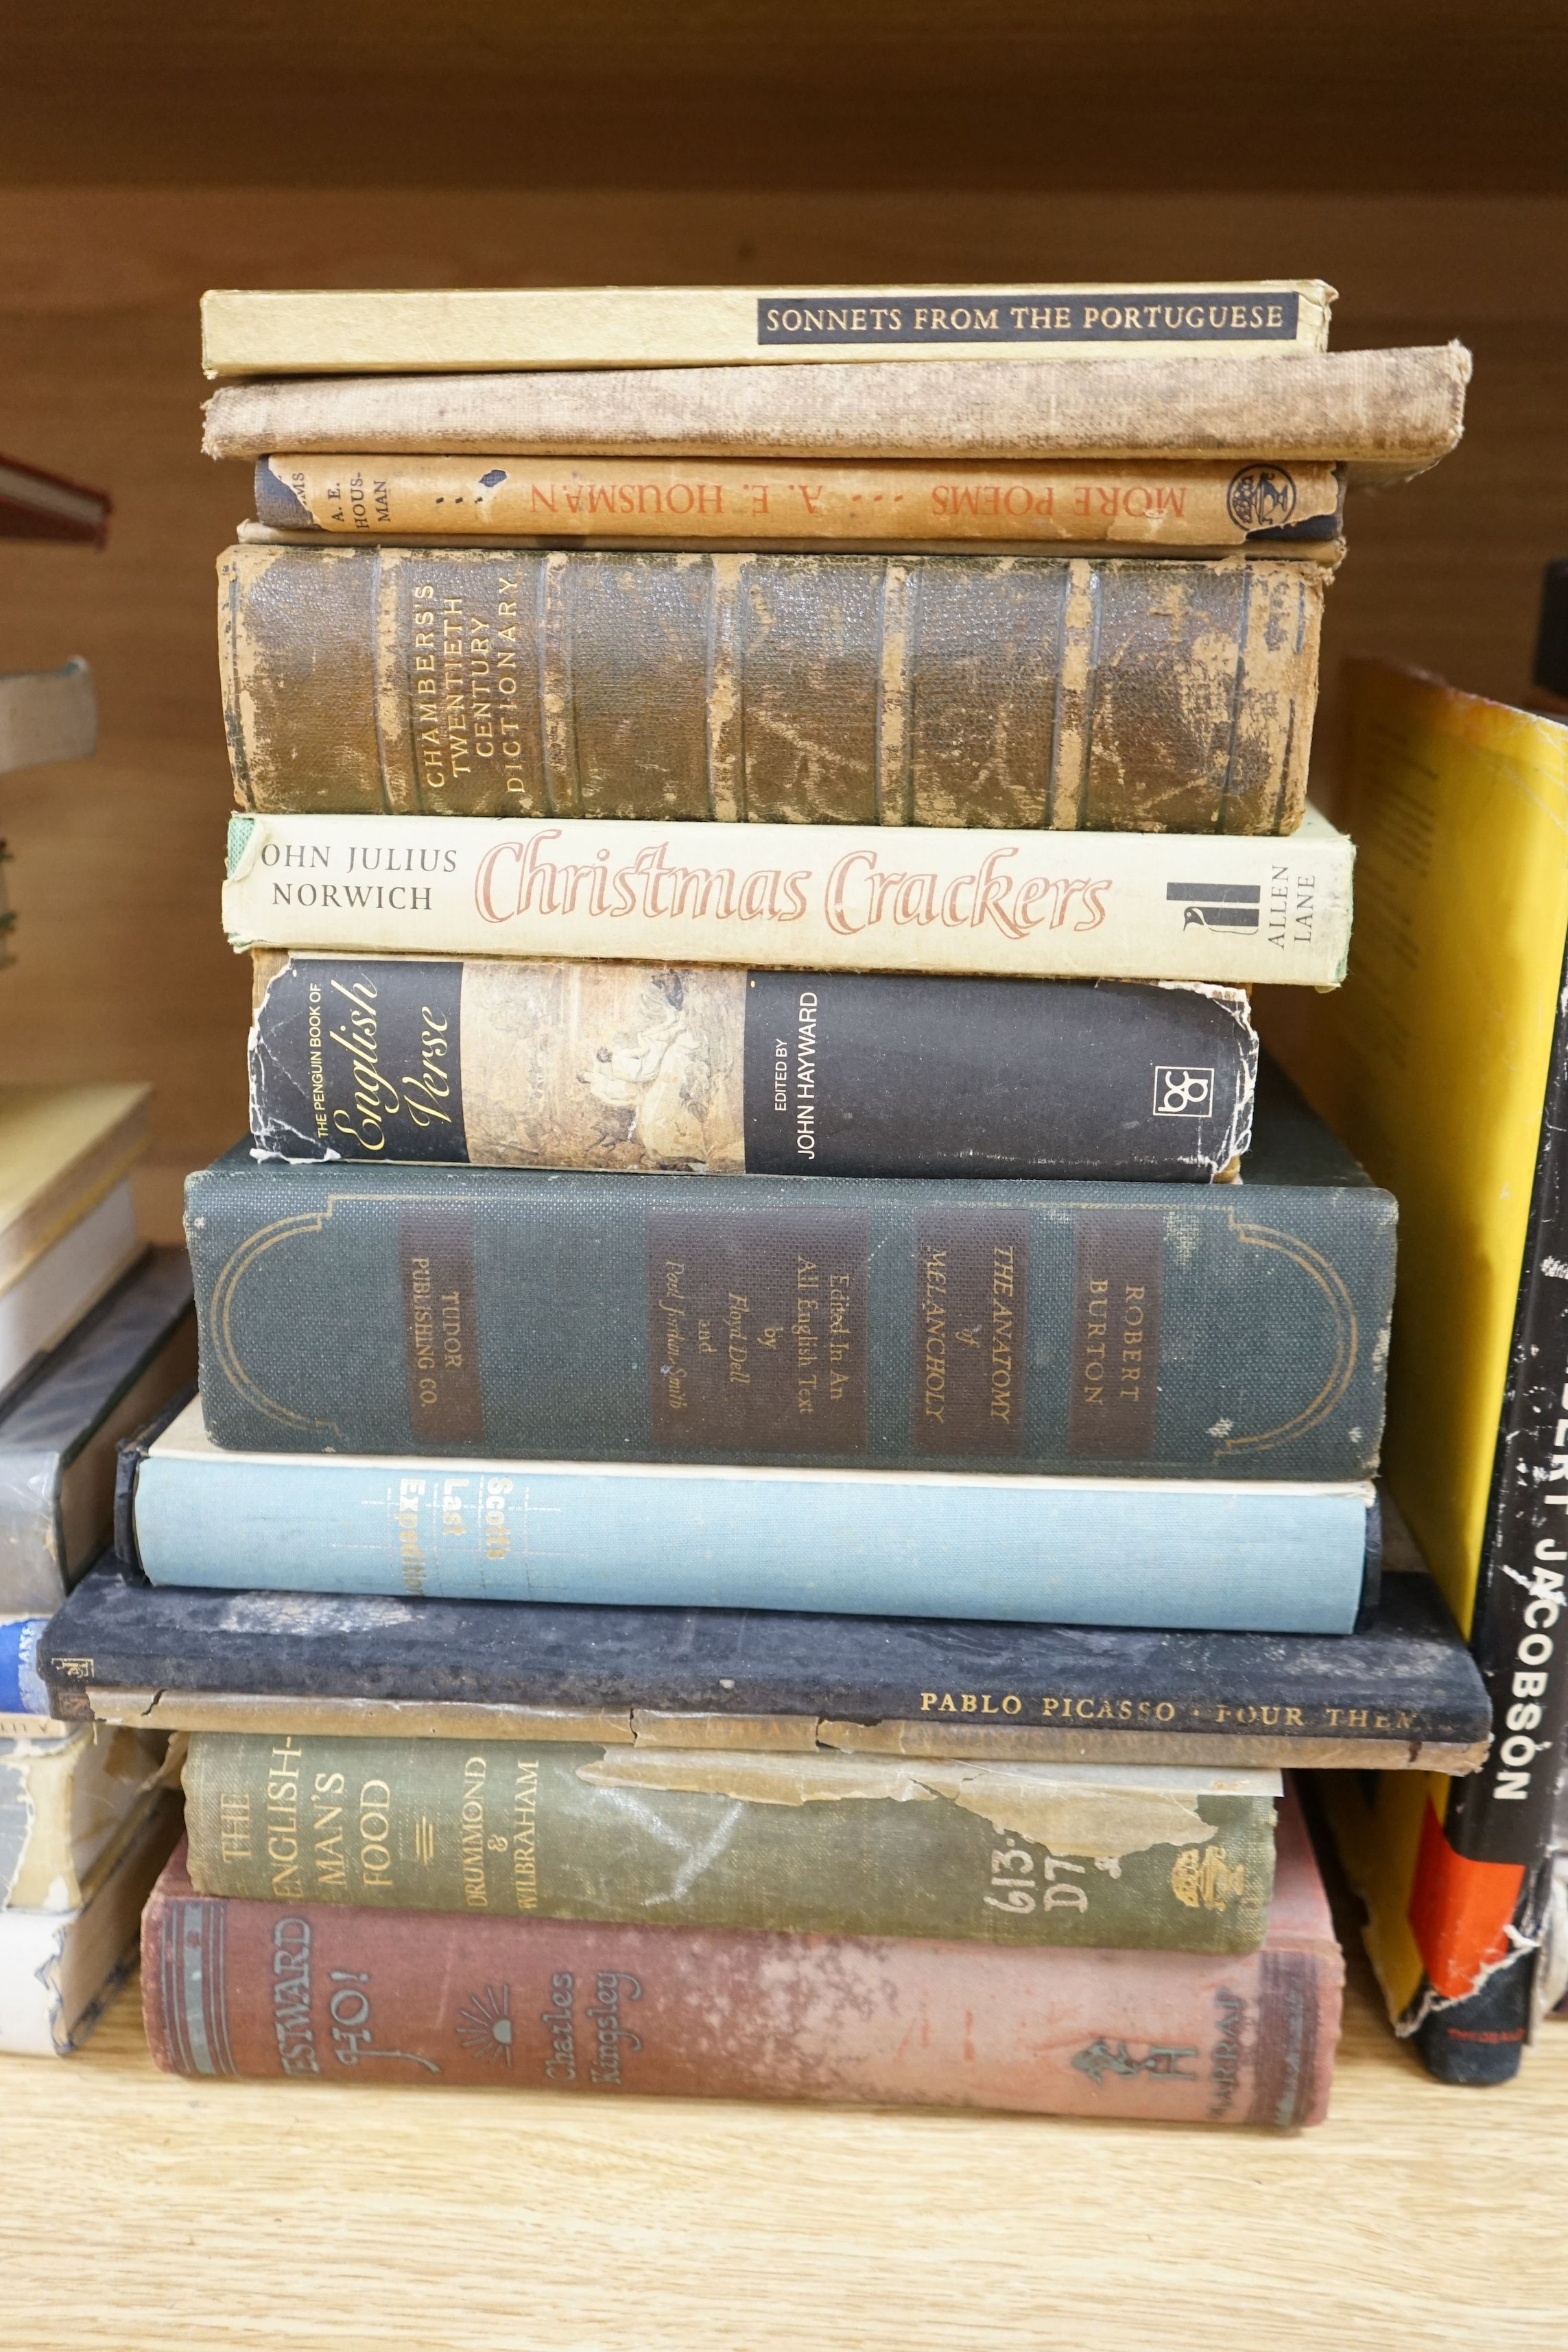 Miscellaneous Books - including Jane Austen, 7 vols. Folio Society boxed set (1975, illus. Joan Hassall); 15 other Folio Society vols., and others to include British War Relief Cookery Book (Philippines, 1941), 43 books